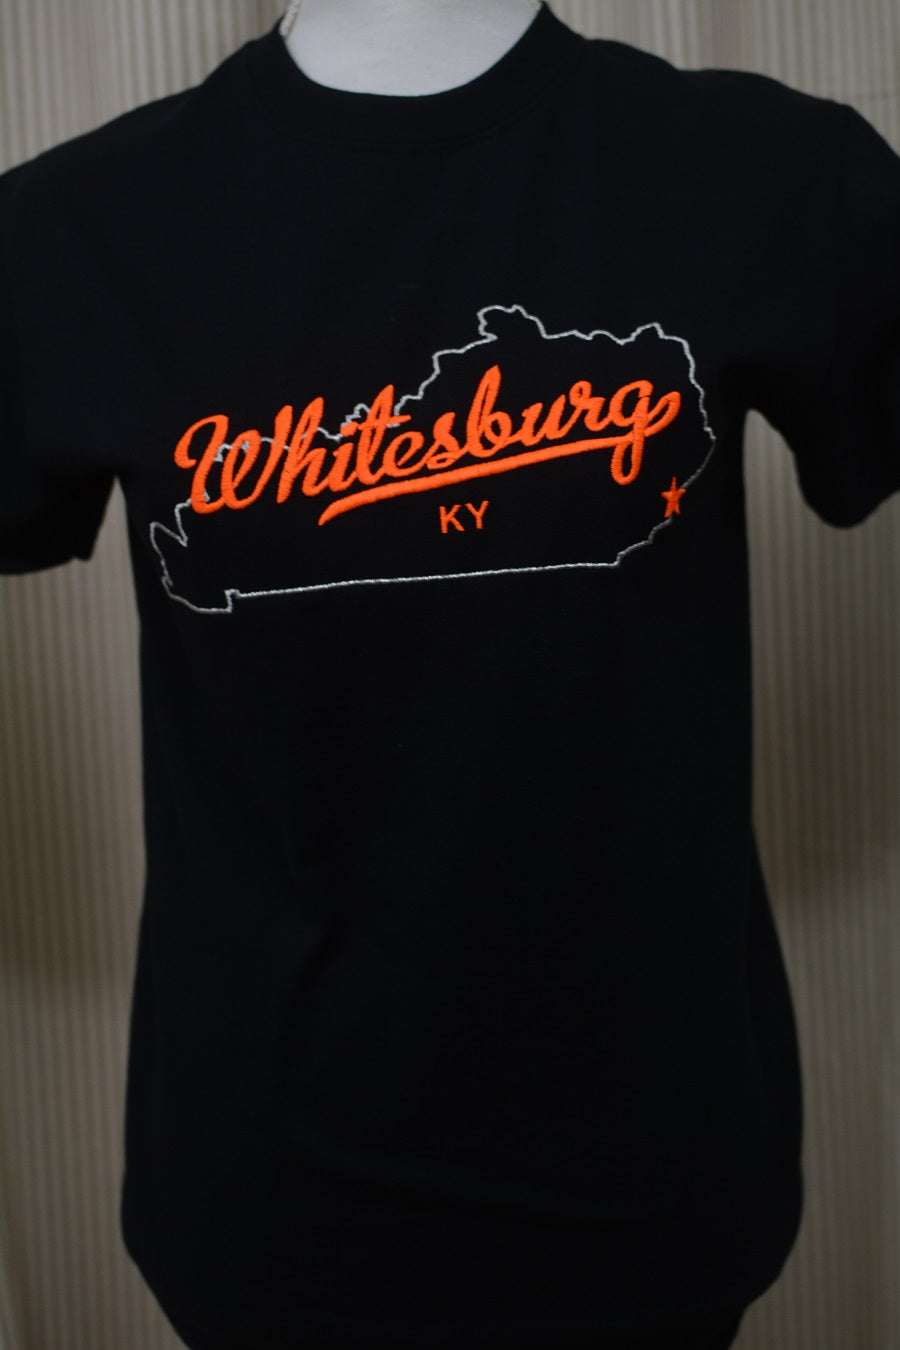 KENTUCKY INSPIRED T-SHIRTS AND GIFTS Embroidered Whitesburg KY State Shirt